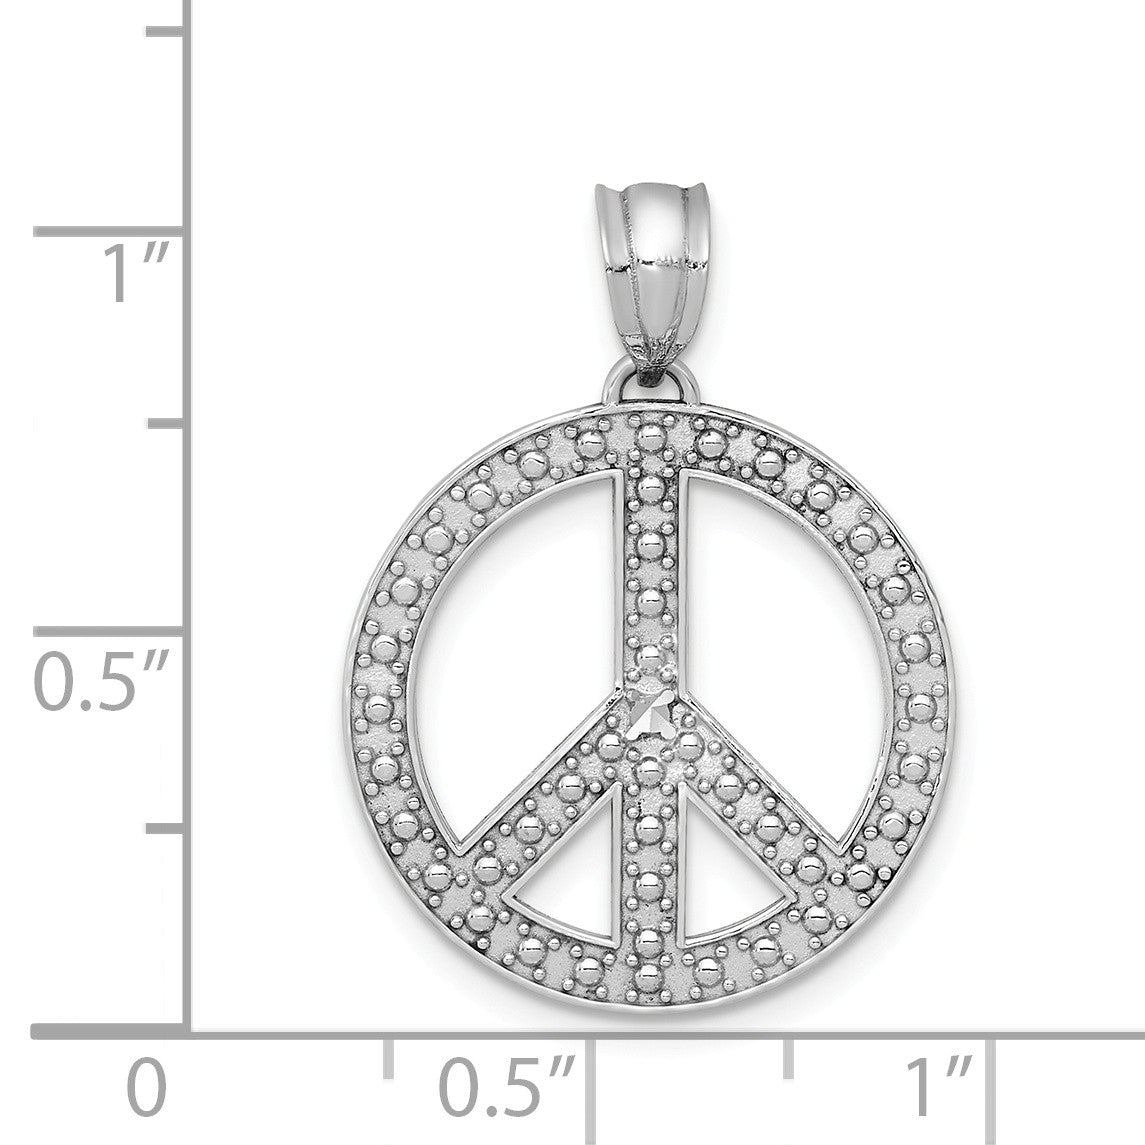 Alternate view of the 14k White Gold Textured Peace Symbol Pendant, 19mm (3/4 inch) by The Black Bow Jewelry Co.